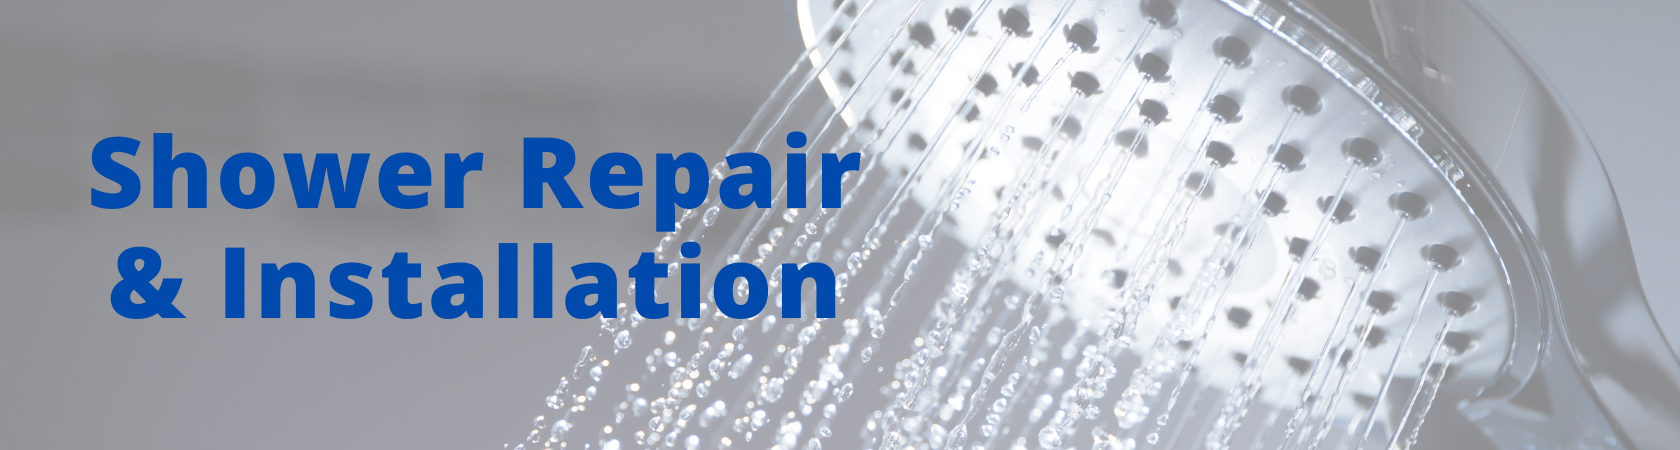 shower repairs and installations